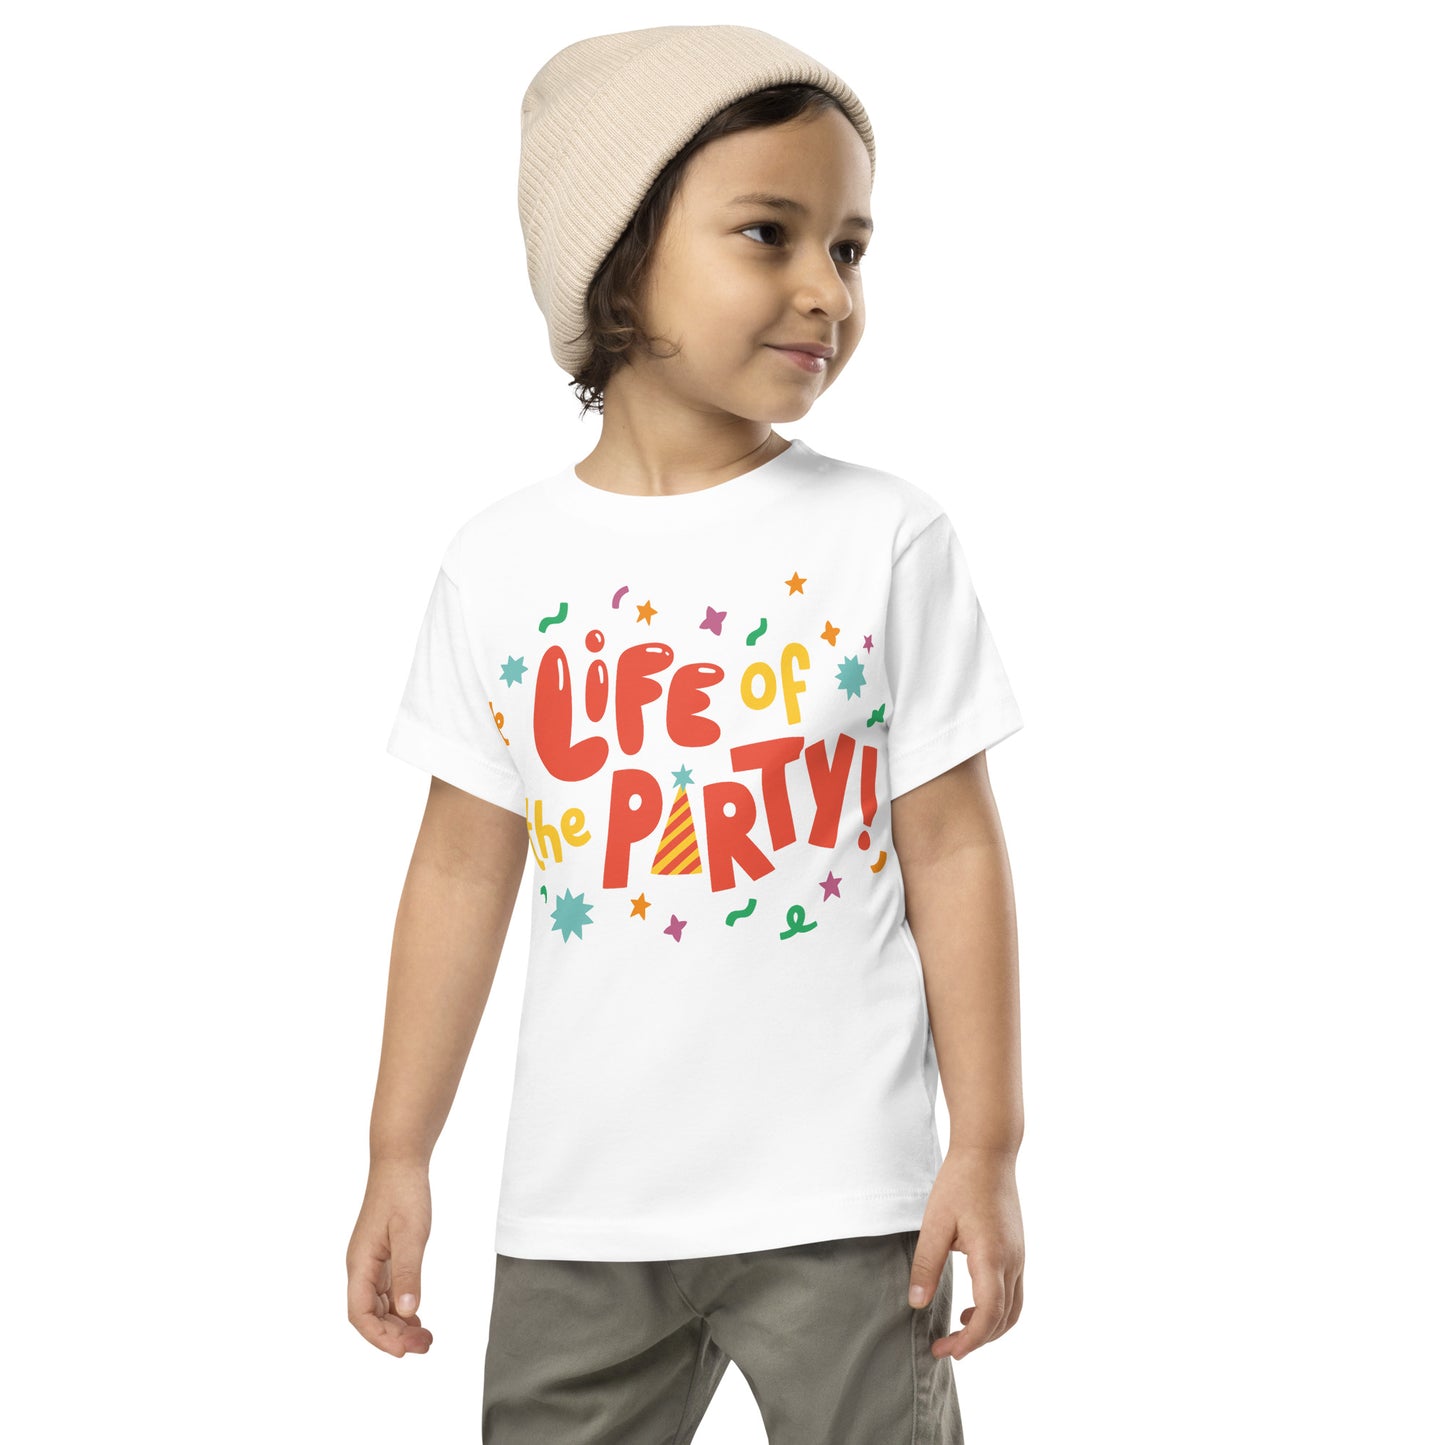 Life Of The Party — Toddler Tee